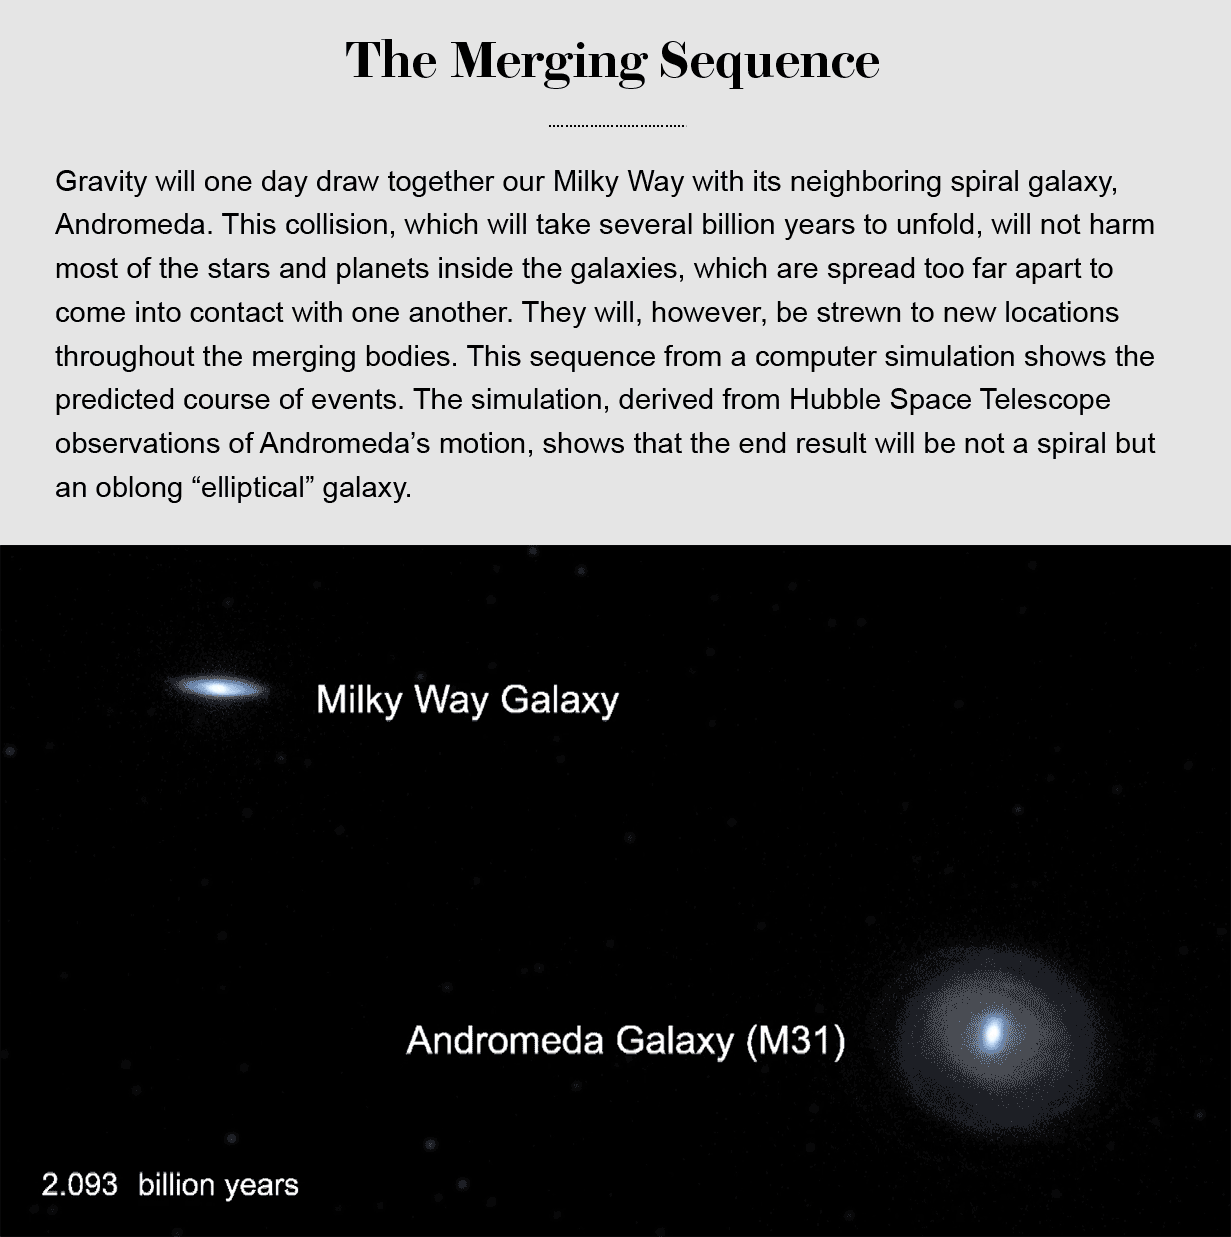 Simulation shows how the Milky Way and Andromeda will merge over 2 billion years, eventually forming a single oblong galaxy.